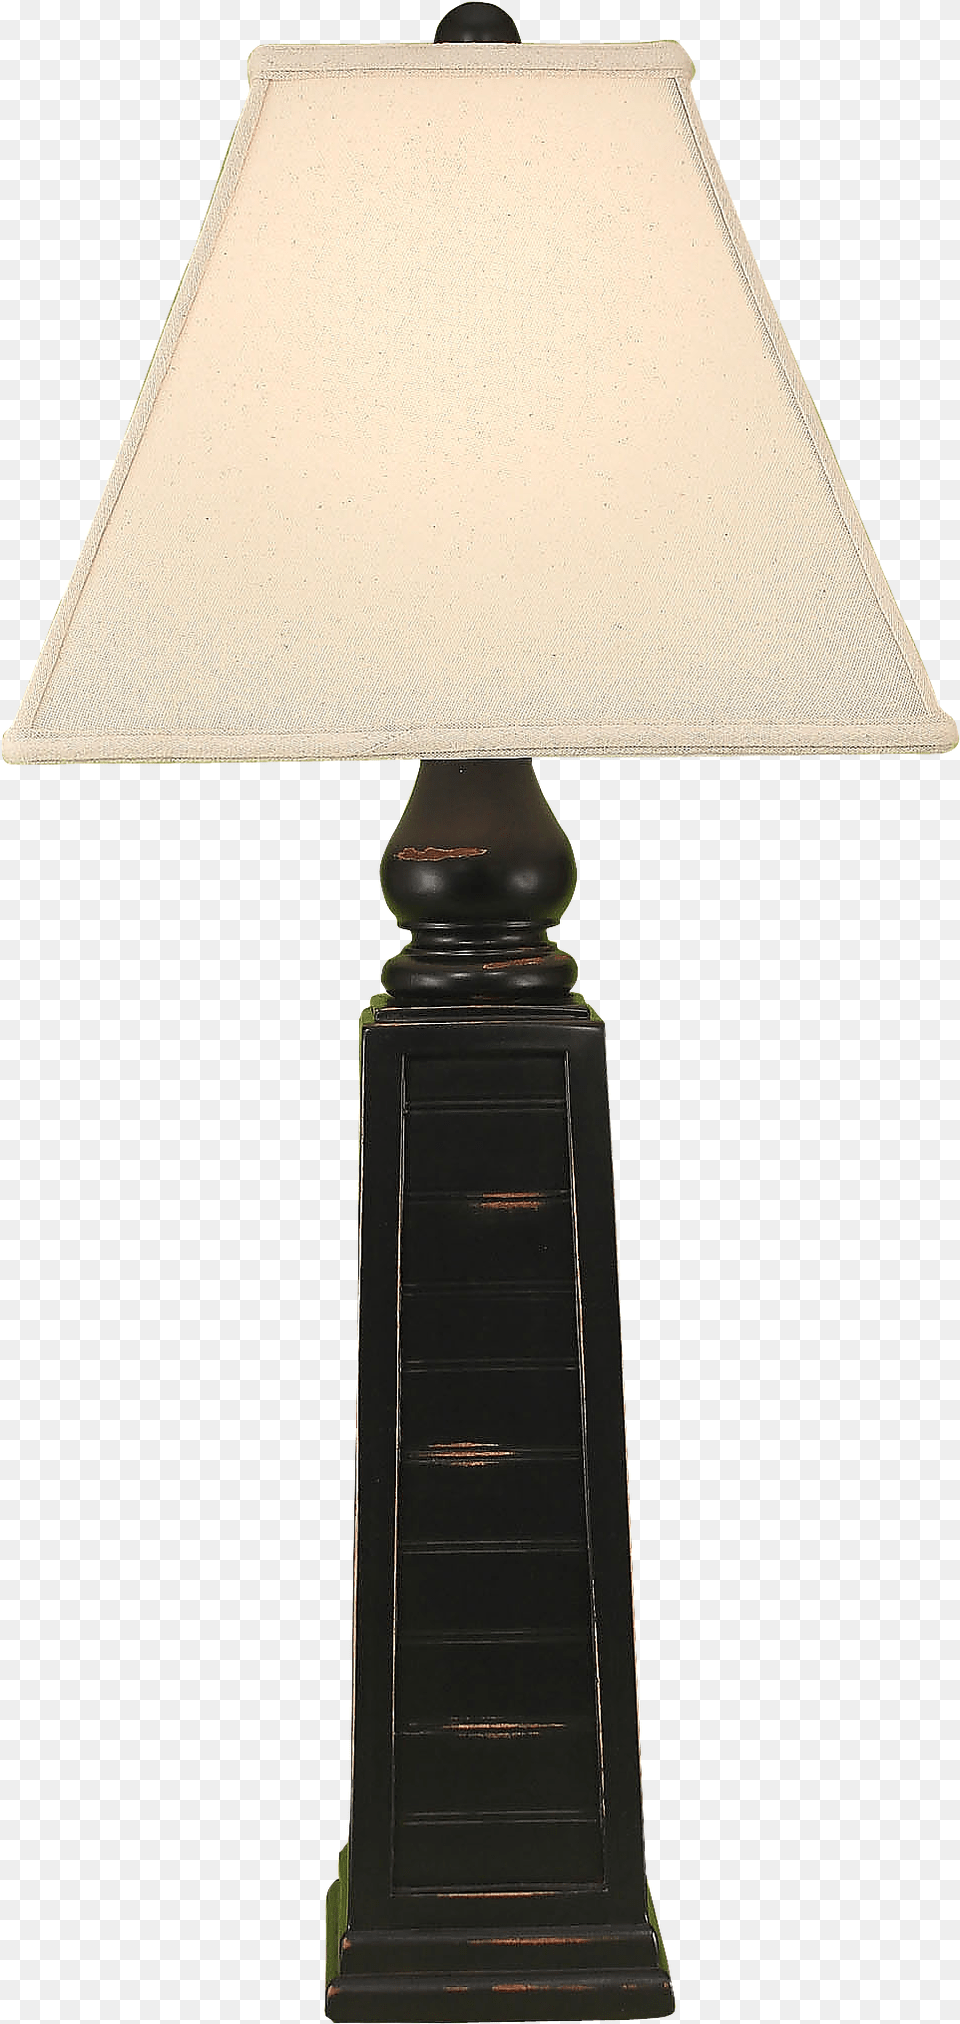 Distressed Black Pyramid Table Lamp Casual Living 33quot Table Lamp Coast Lamp Mfg 14, Lampshade, Table Lamp Free Png Download